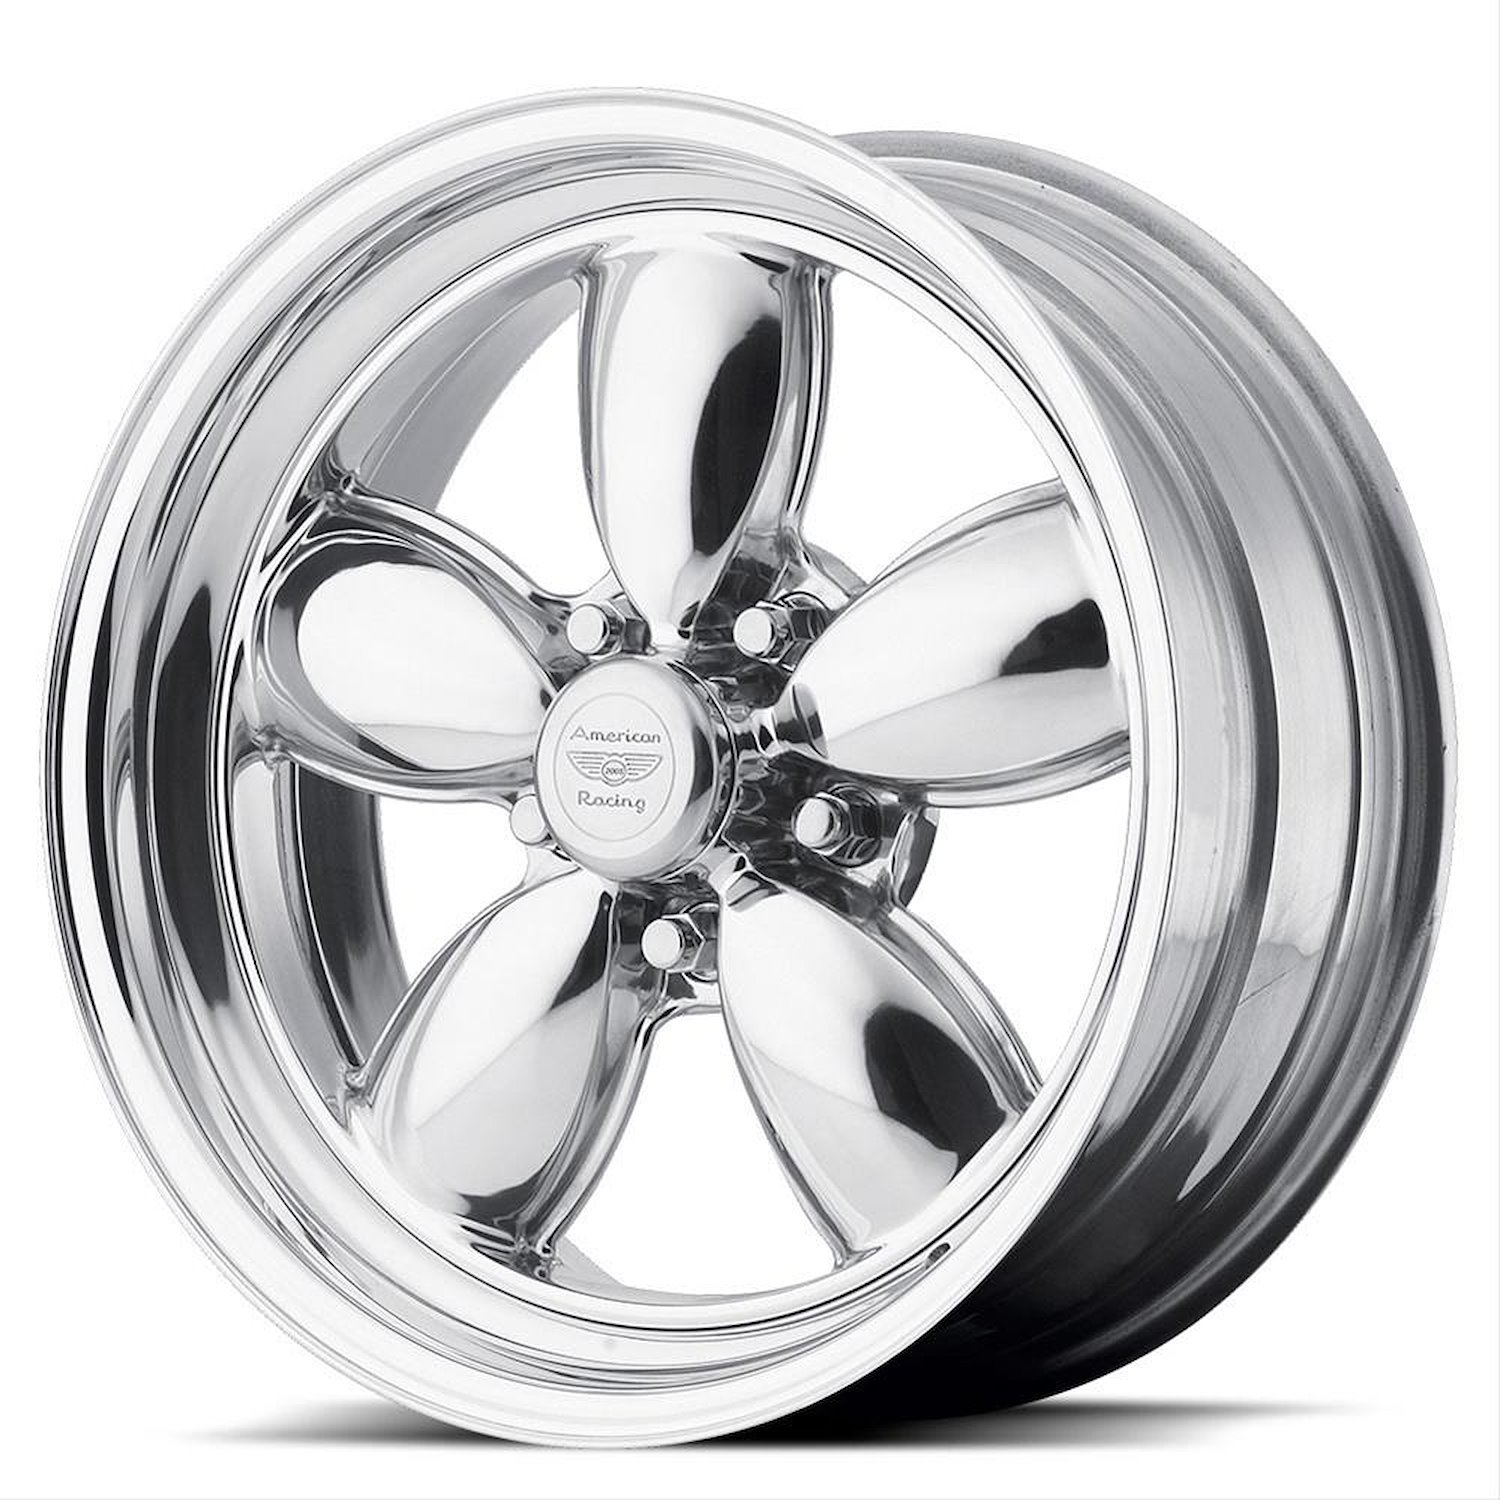 AMERICAN RACING CLASSIC 200S TWO-PIECE POLISHED 17 x 9.5 5x4.5 38 6.75